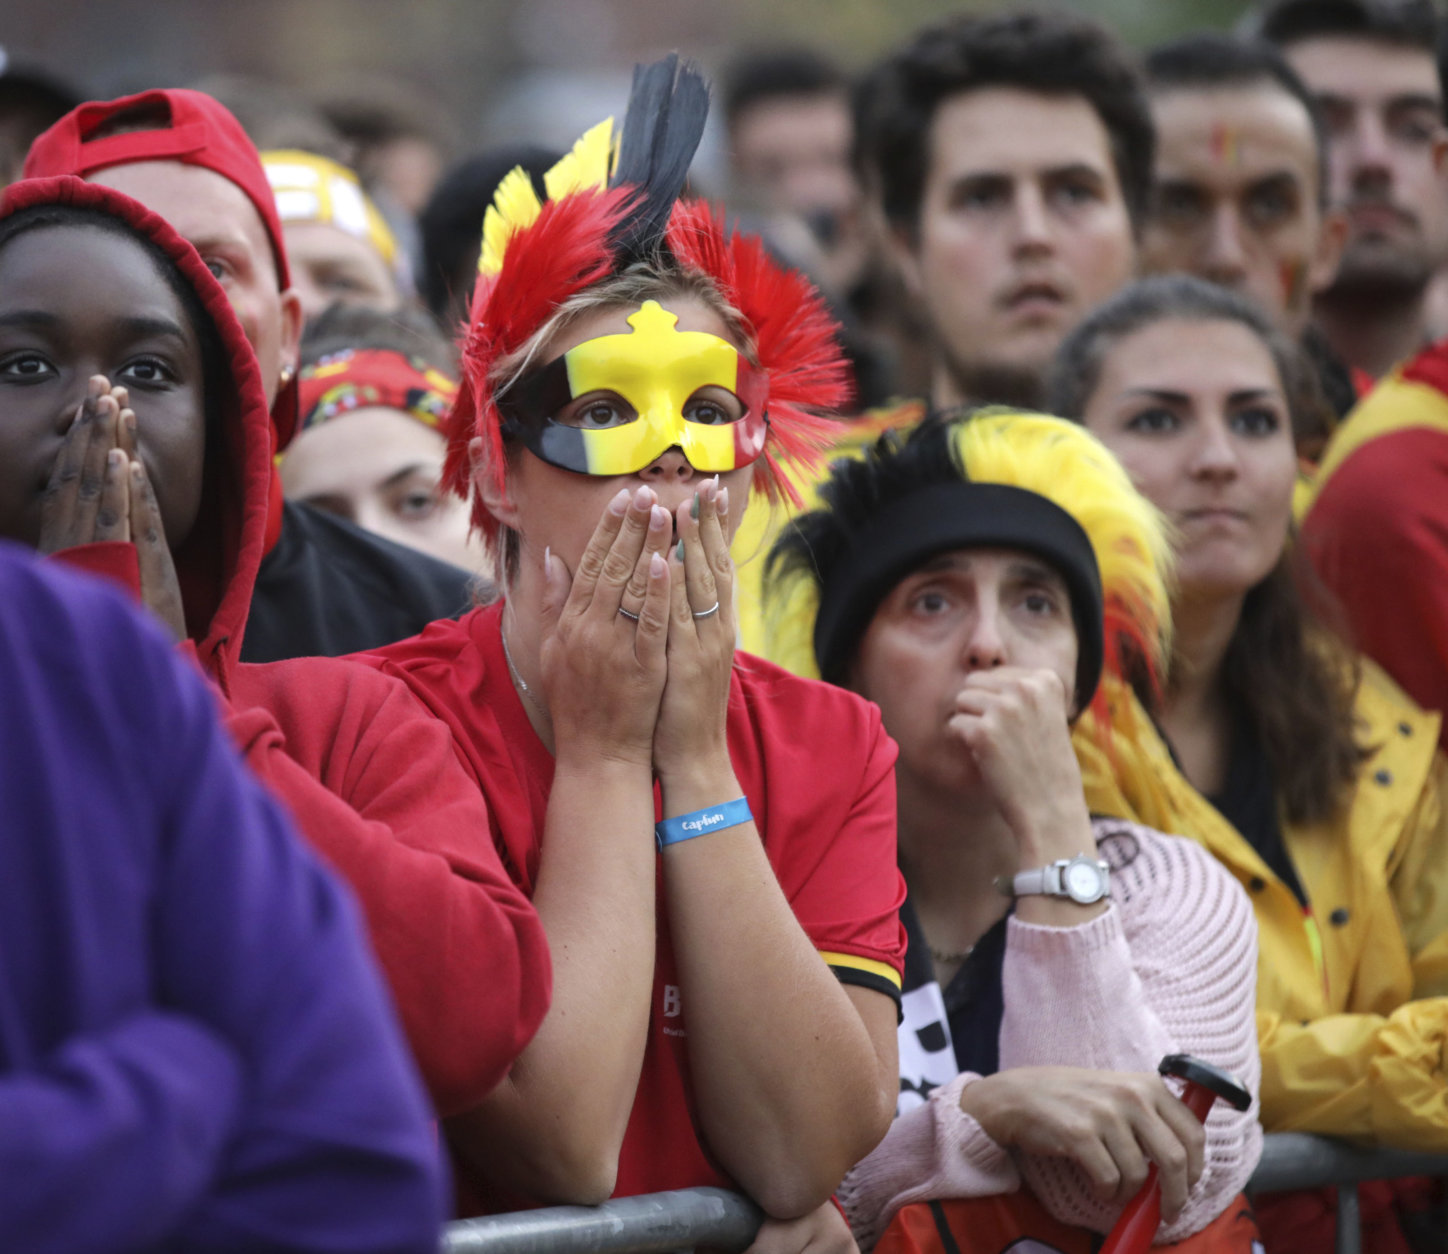 Belgium fans react as they watch a 2018 World Cup semifinal soccer match between France and Belgium on a giant screen in Jette, Belgium, Tuesday, July 10, 2018. (AP Photo/Olivier Matthys)